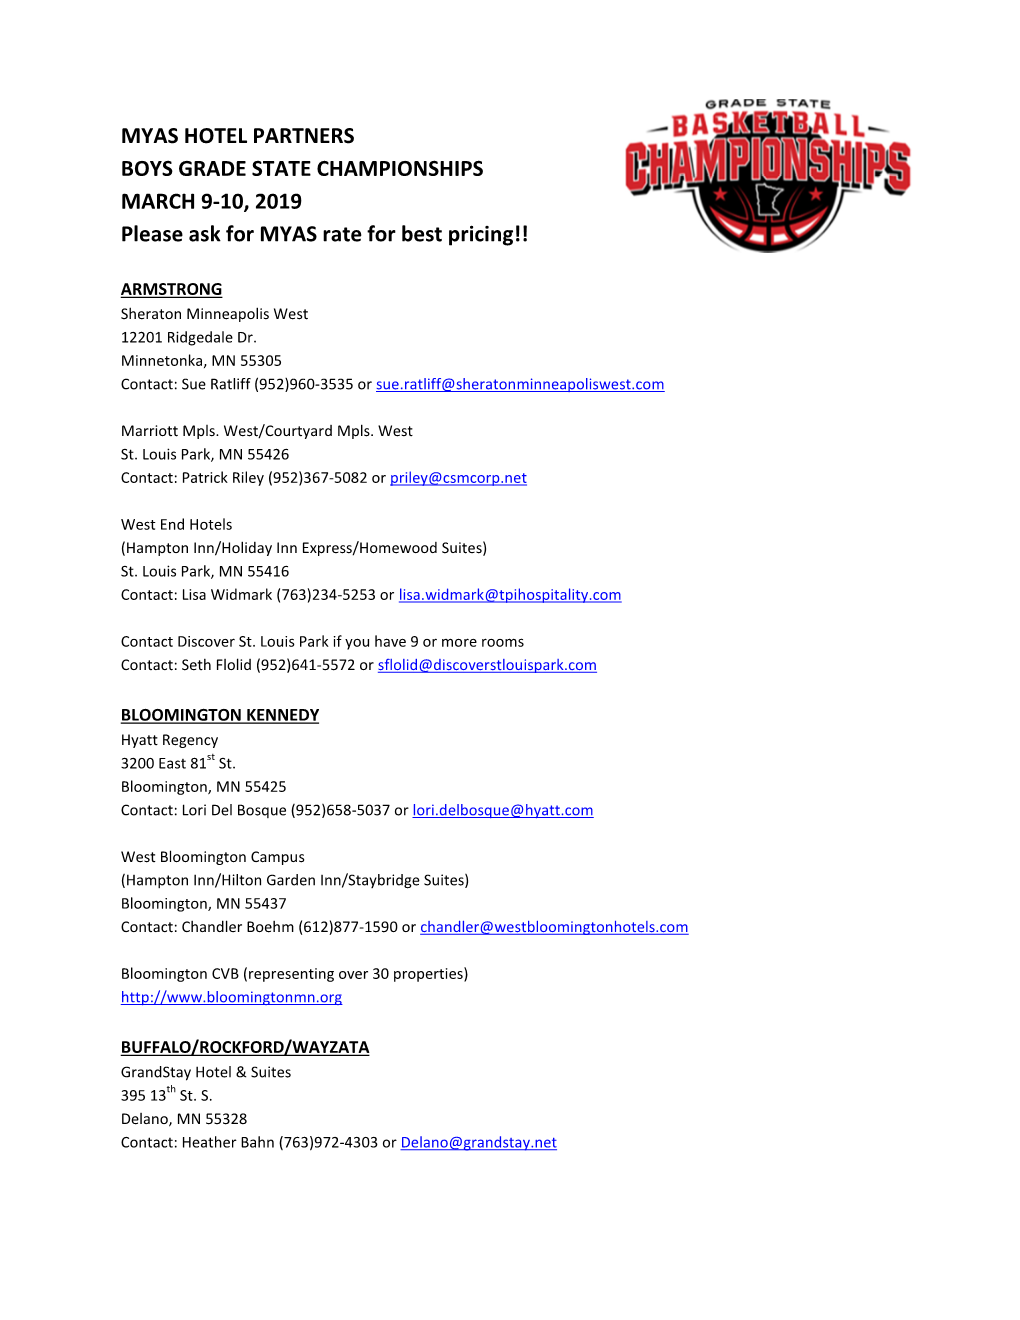 MYAS HOTEL PARTNERS BOYS GRADE STATE CHAMPIONSHIPS MARCH 9-10, 2019 Please Ask for MYAS Rate for Best Pricing!!